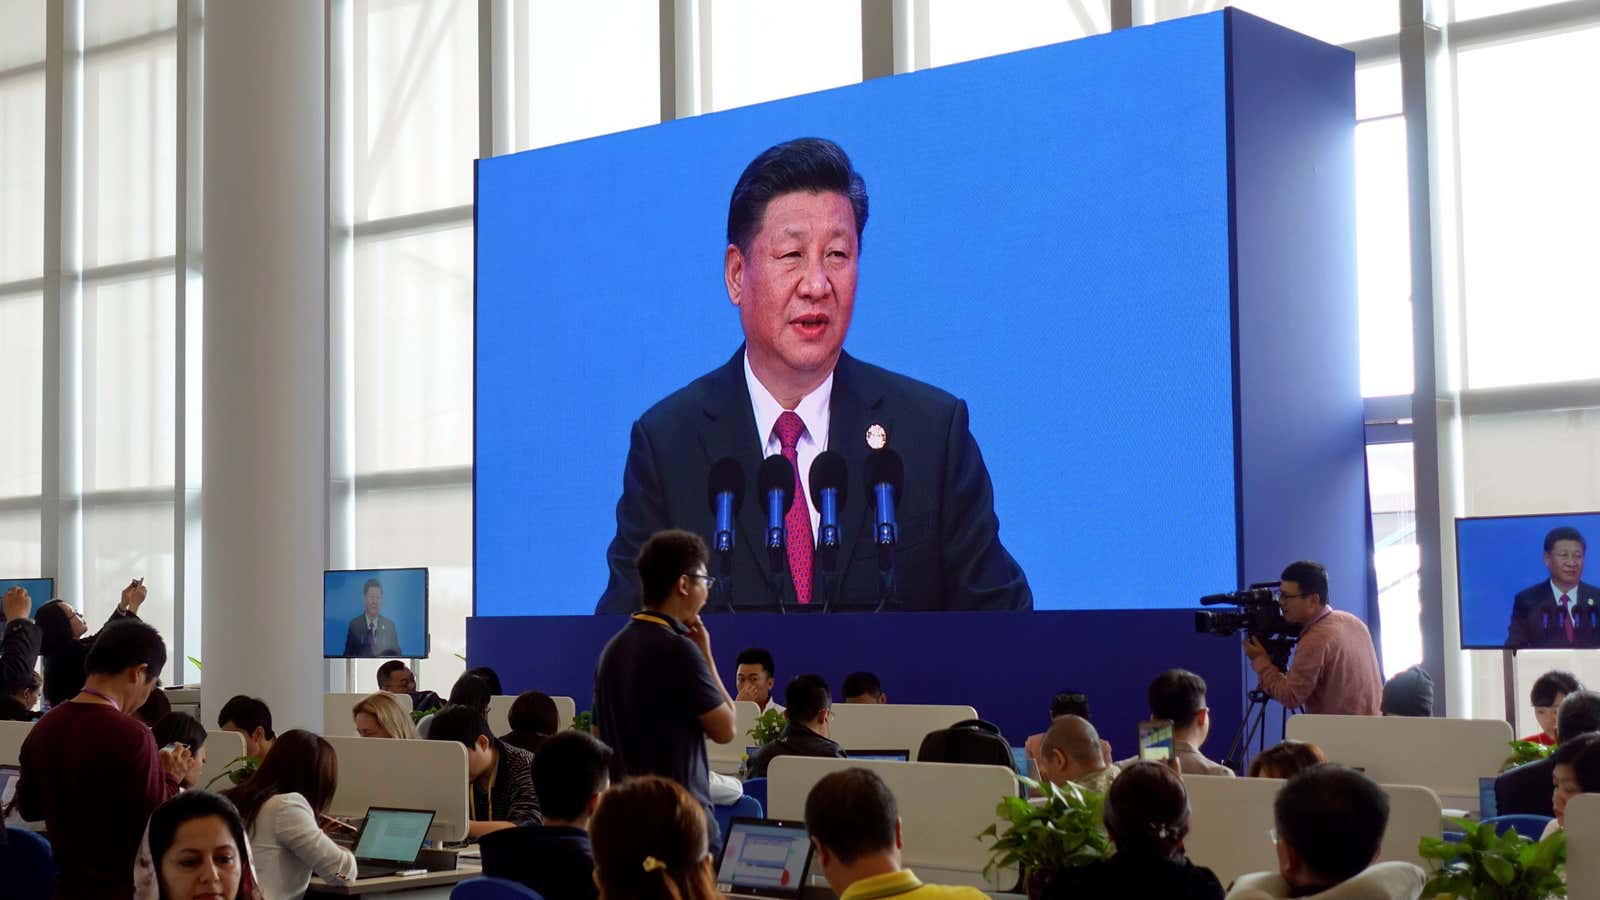 Man of the hour: China’s president Xi Jinping